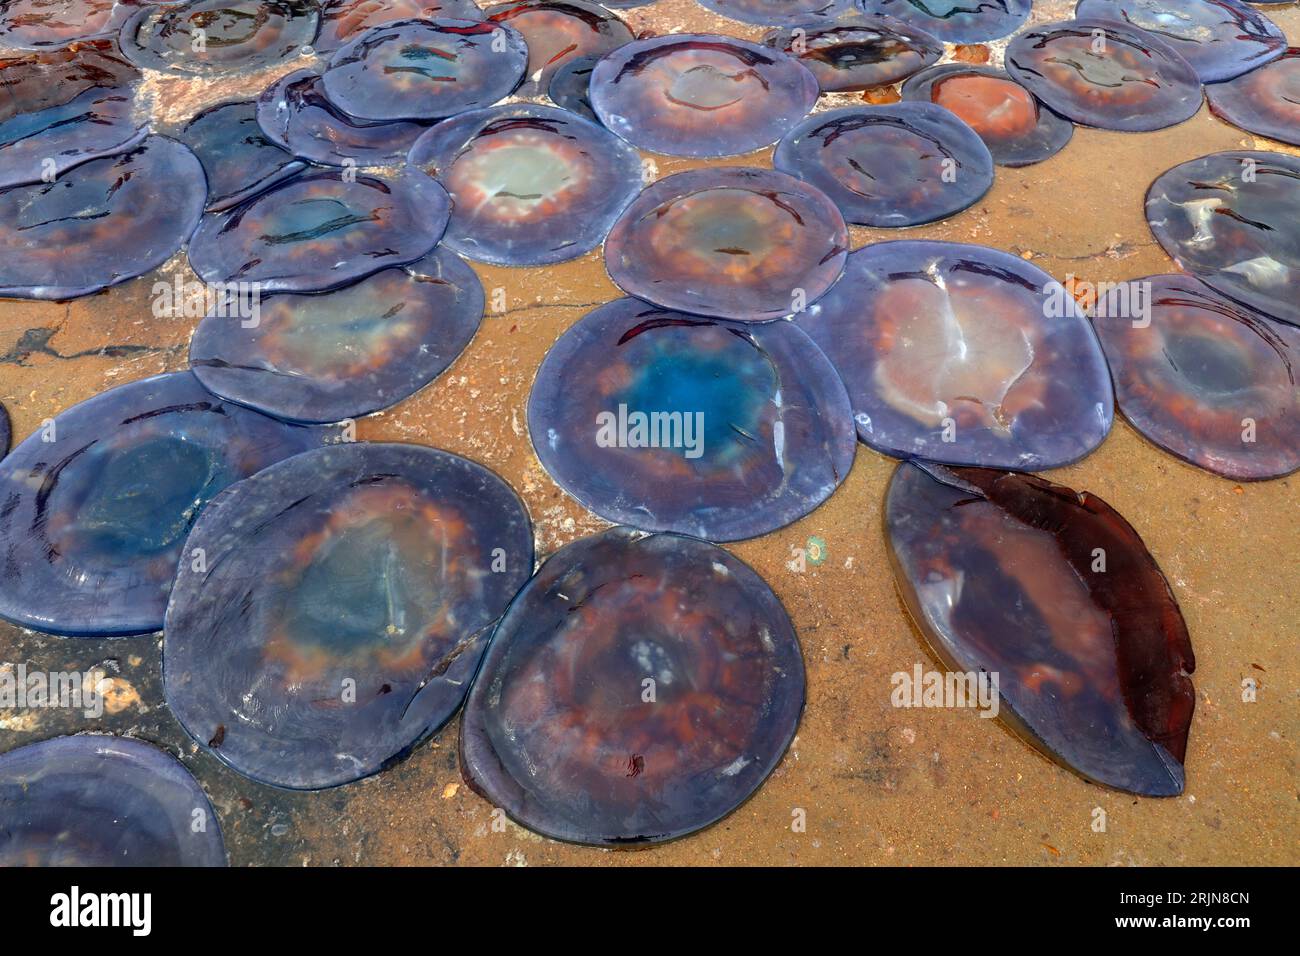 Jellyfish skin covers the ground at a seafood processing plant in North China Stock Photo